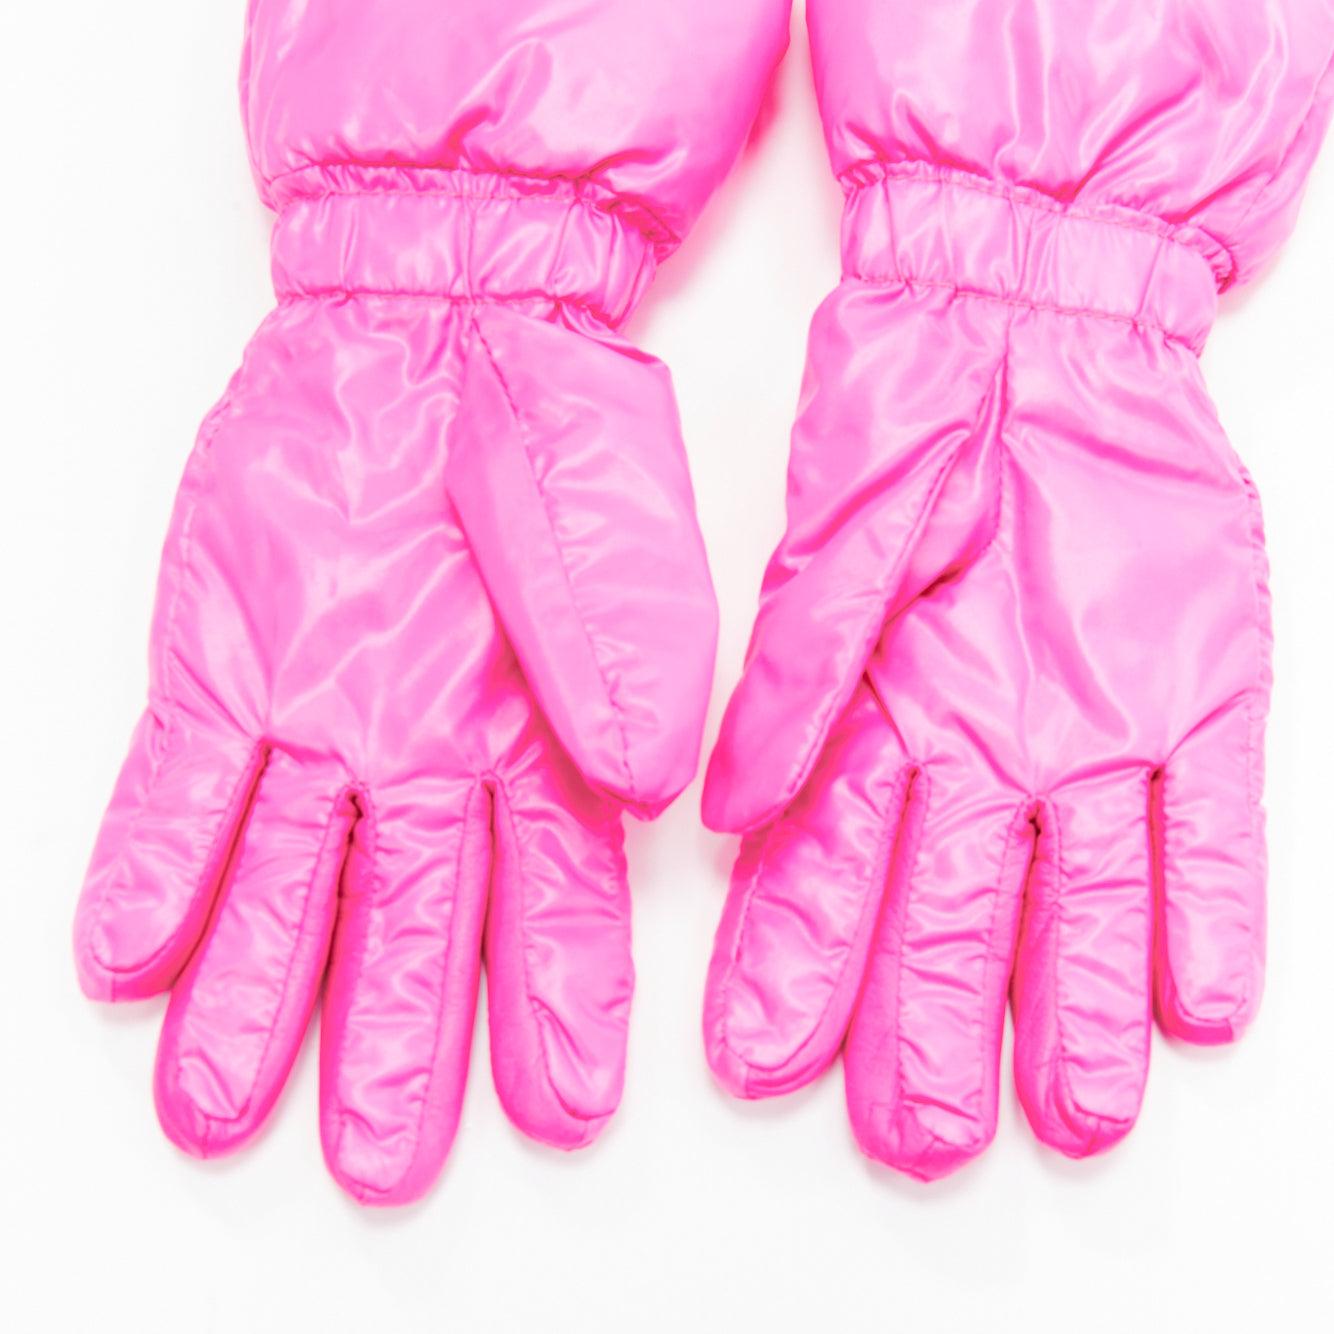 Women's rare MONCLER Pierpaolo Piccioli hot pink leather logo down gloves